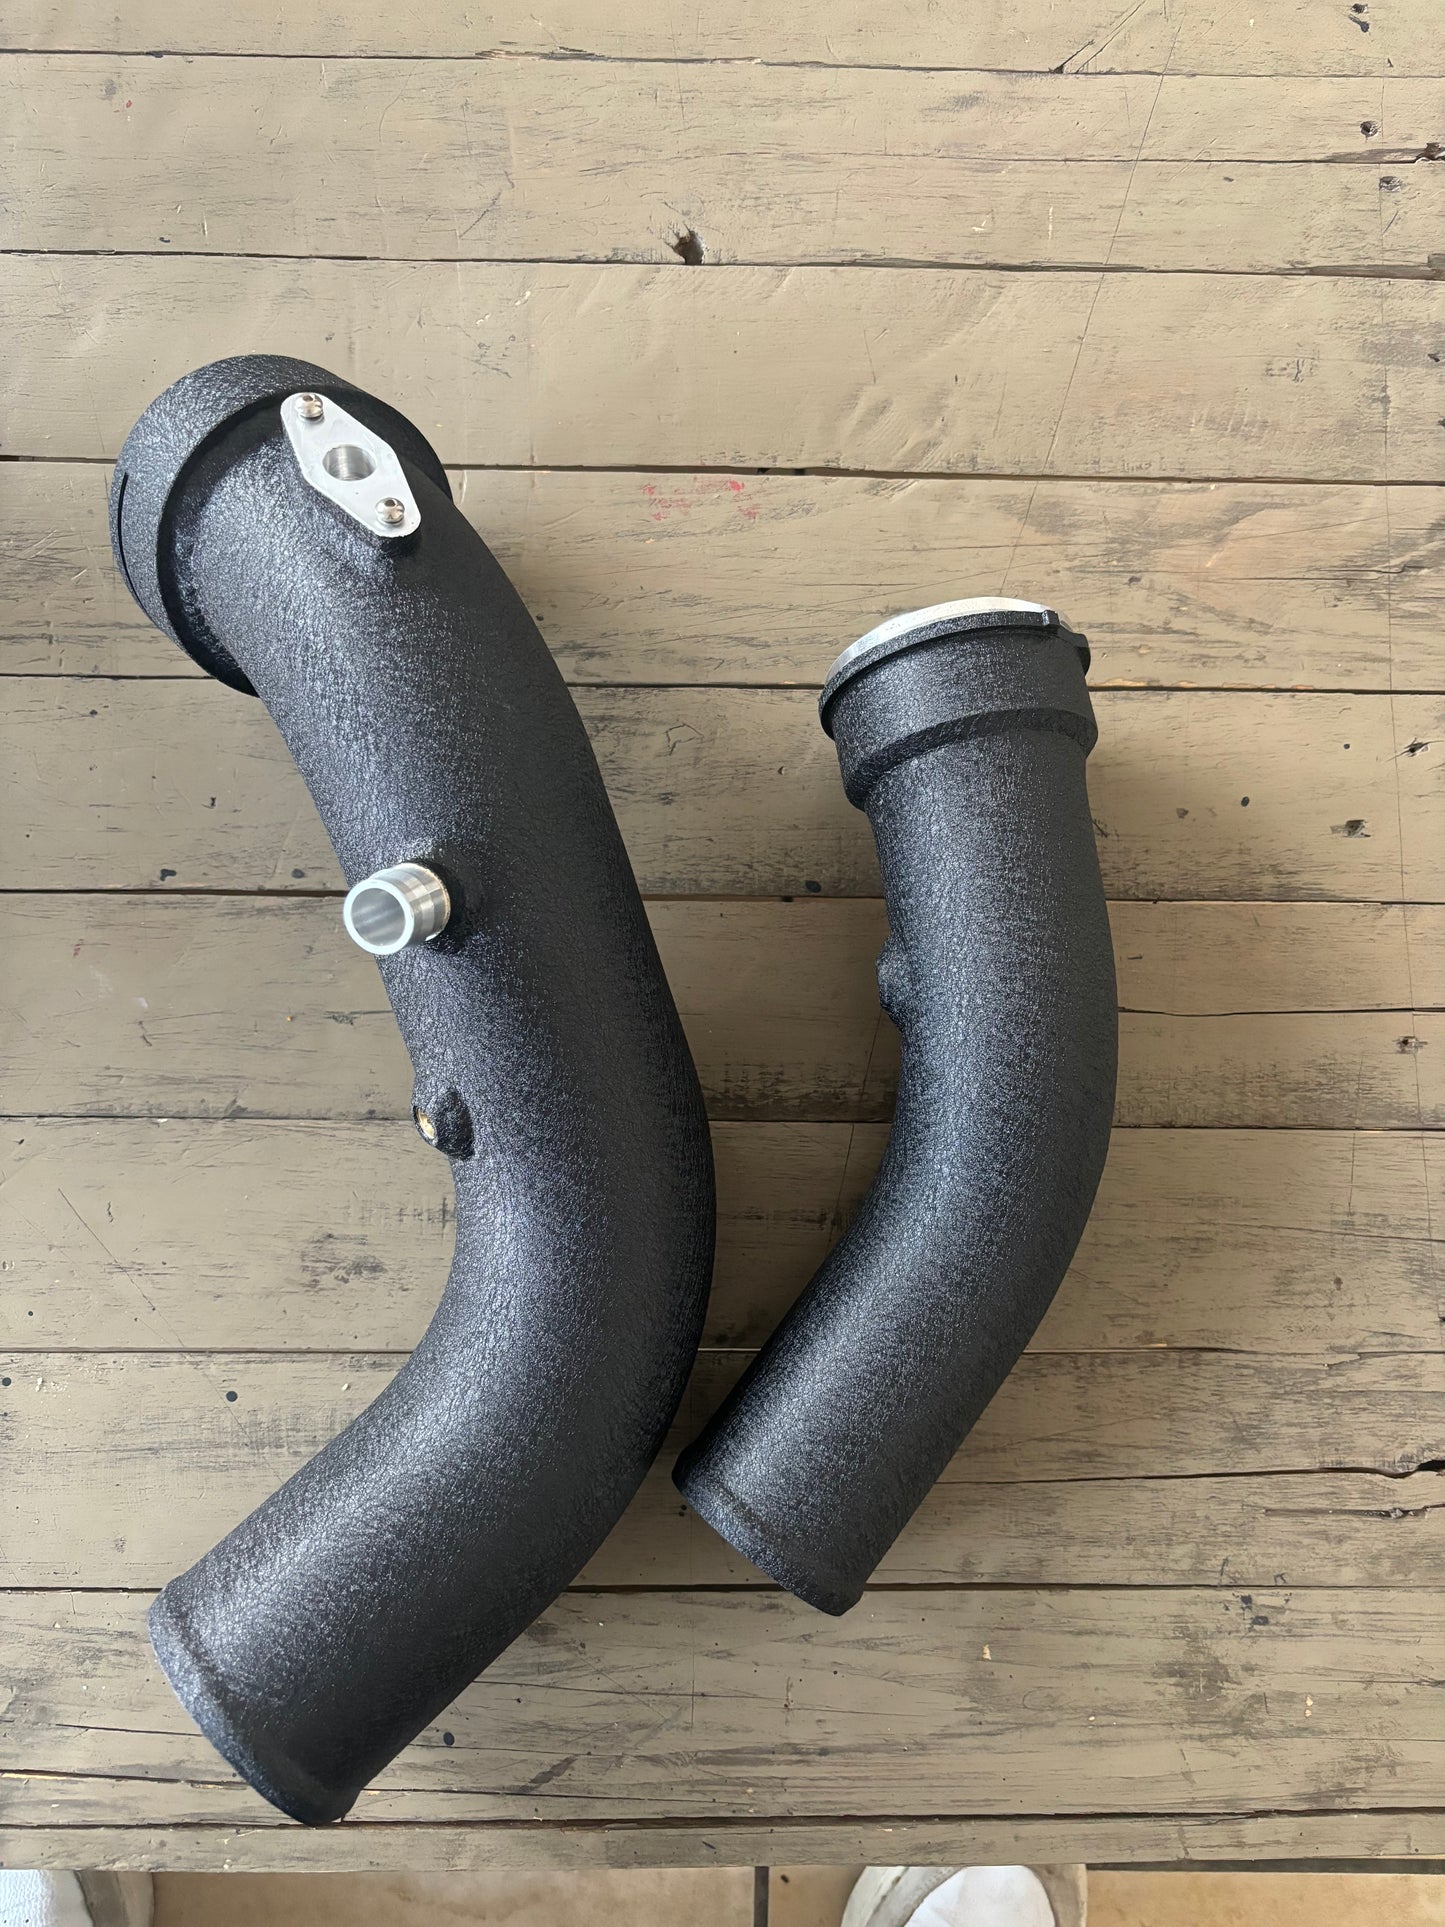 BMW n55 charge pipes